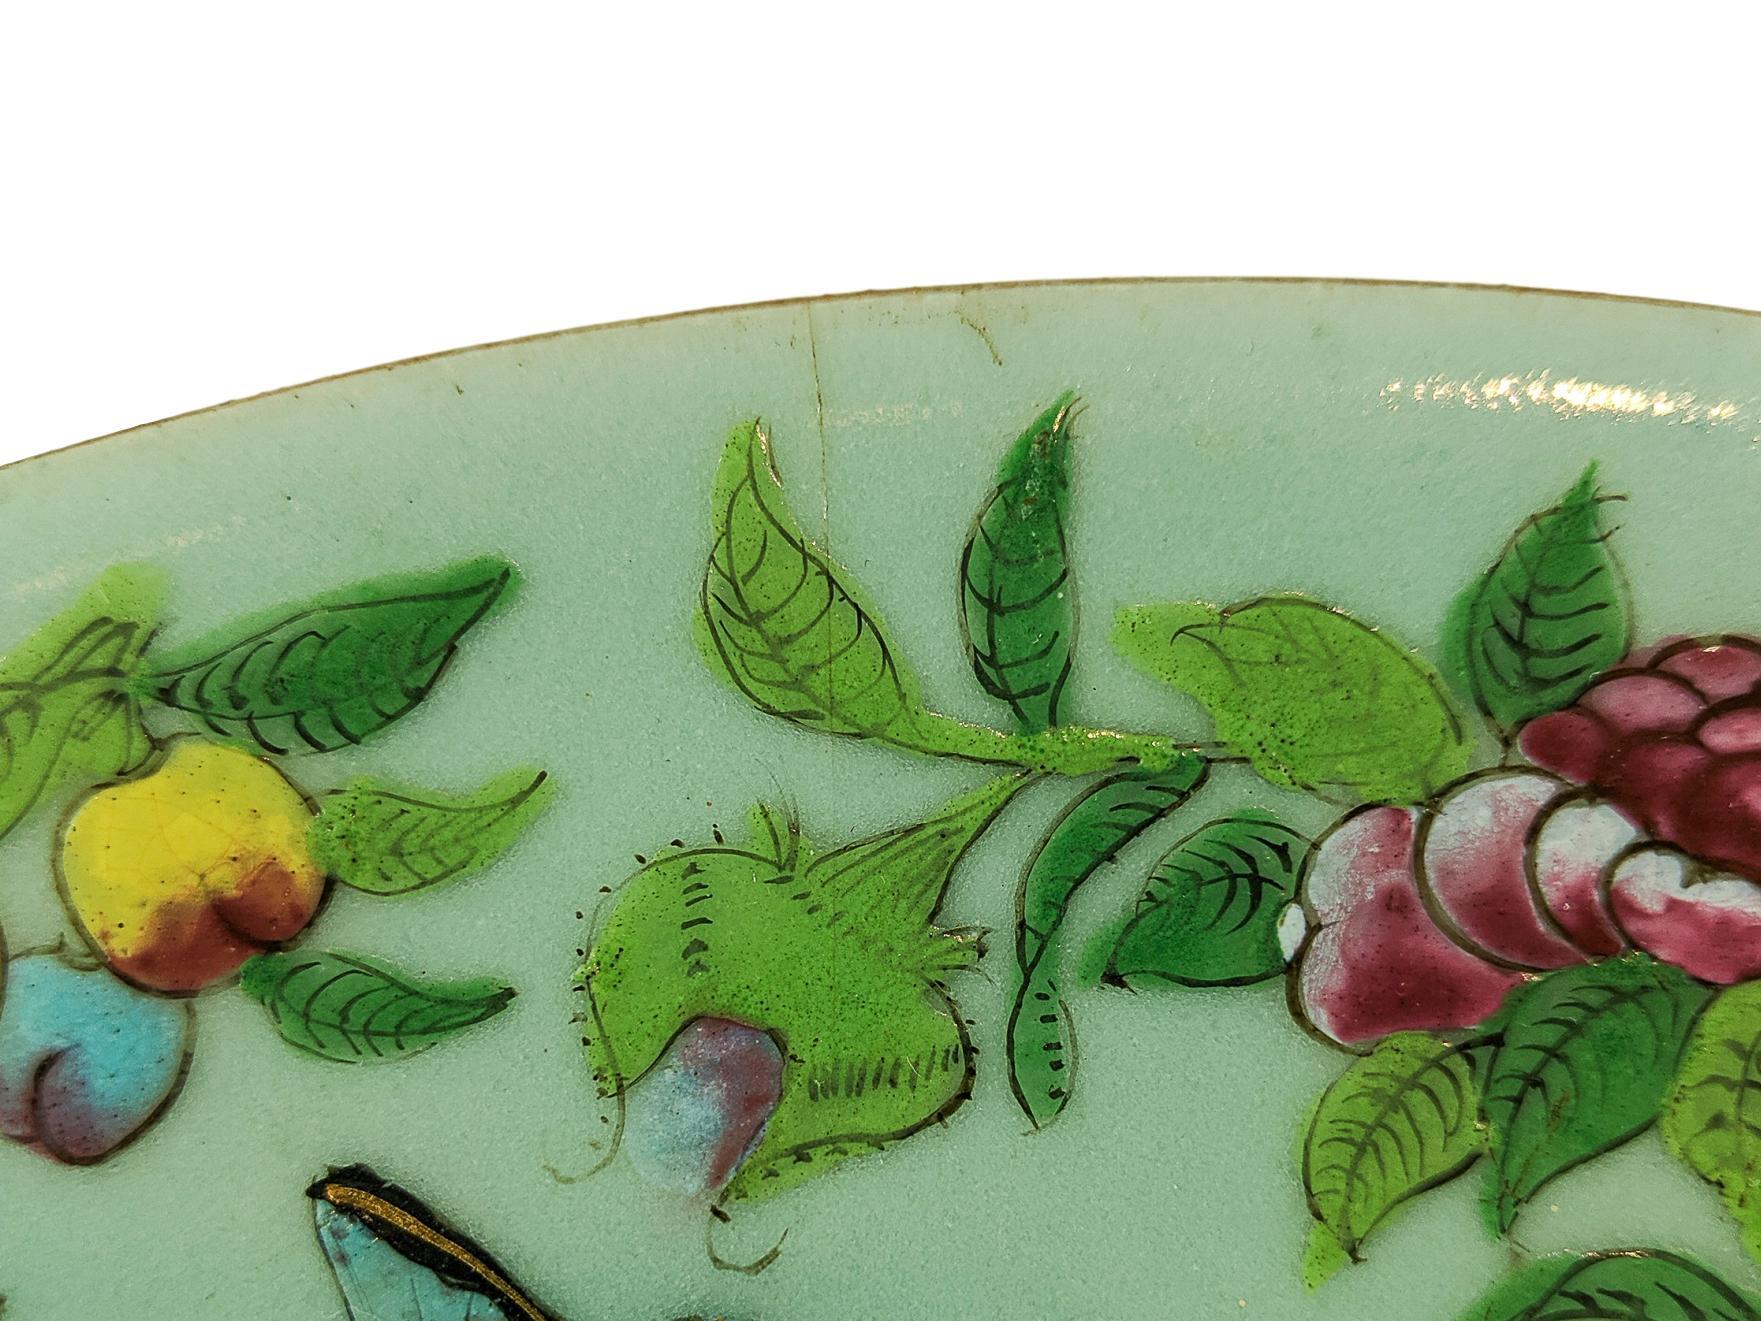 Porcelain Chinese Celadon Famille Rose Plate, Canton, ca. 1850